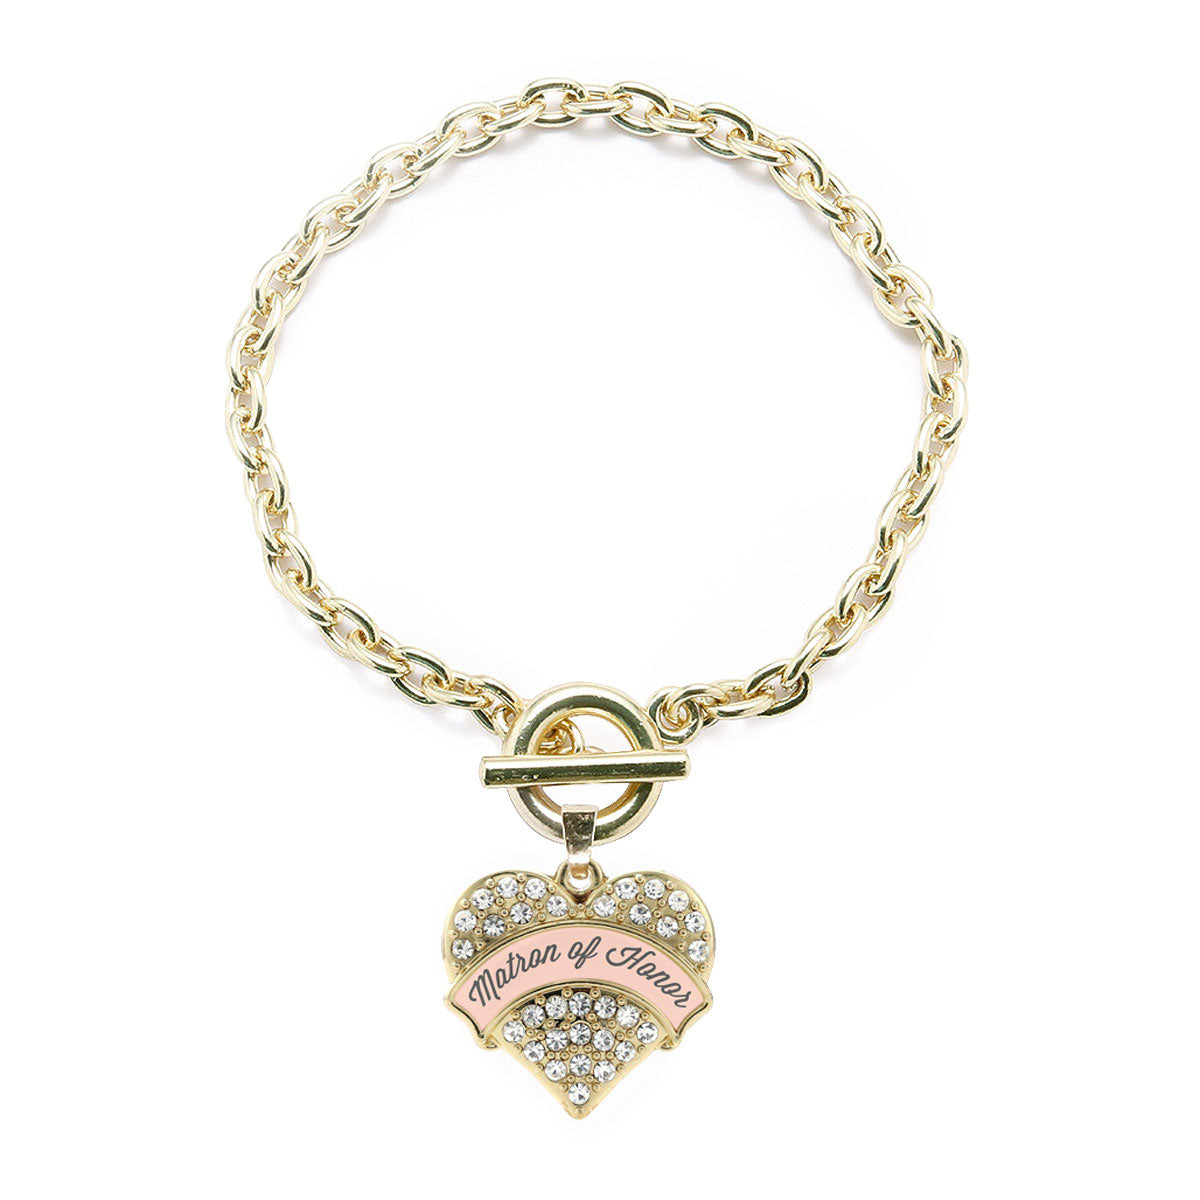 Gold Nude Matron of Honor Pave Heart Charm Toggle Bracelet